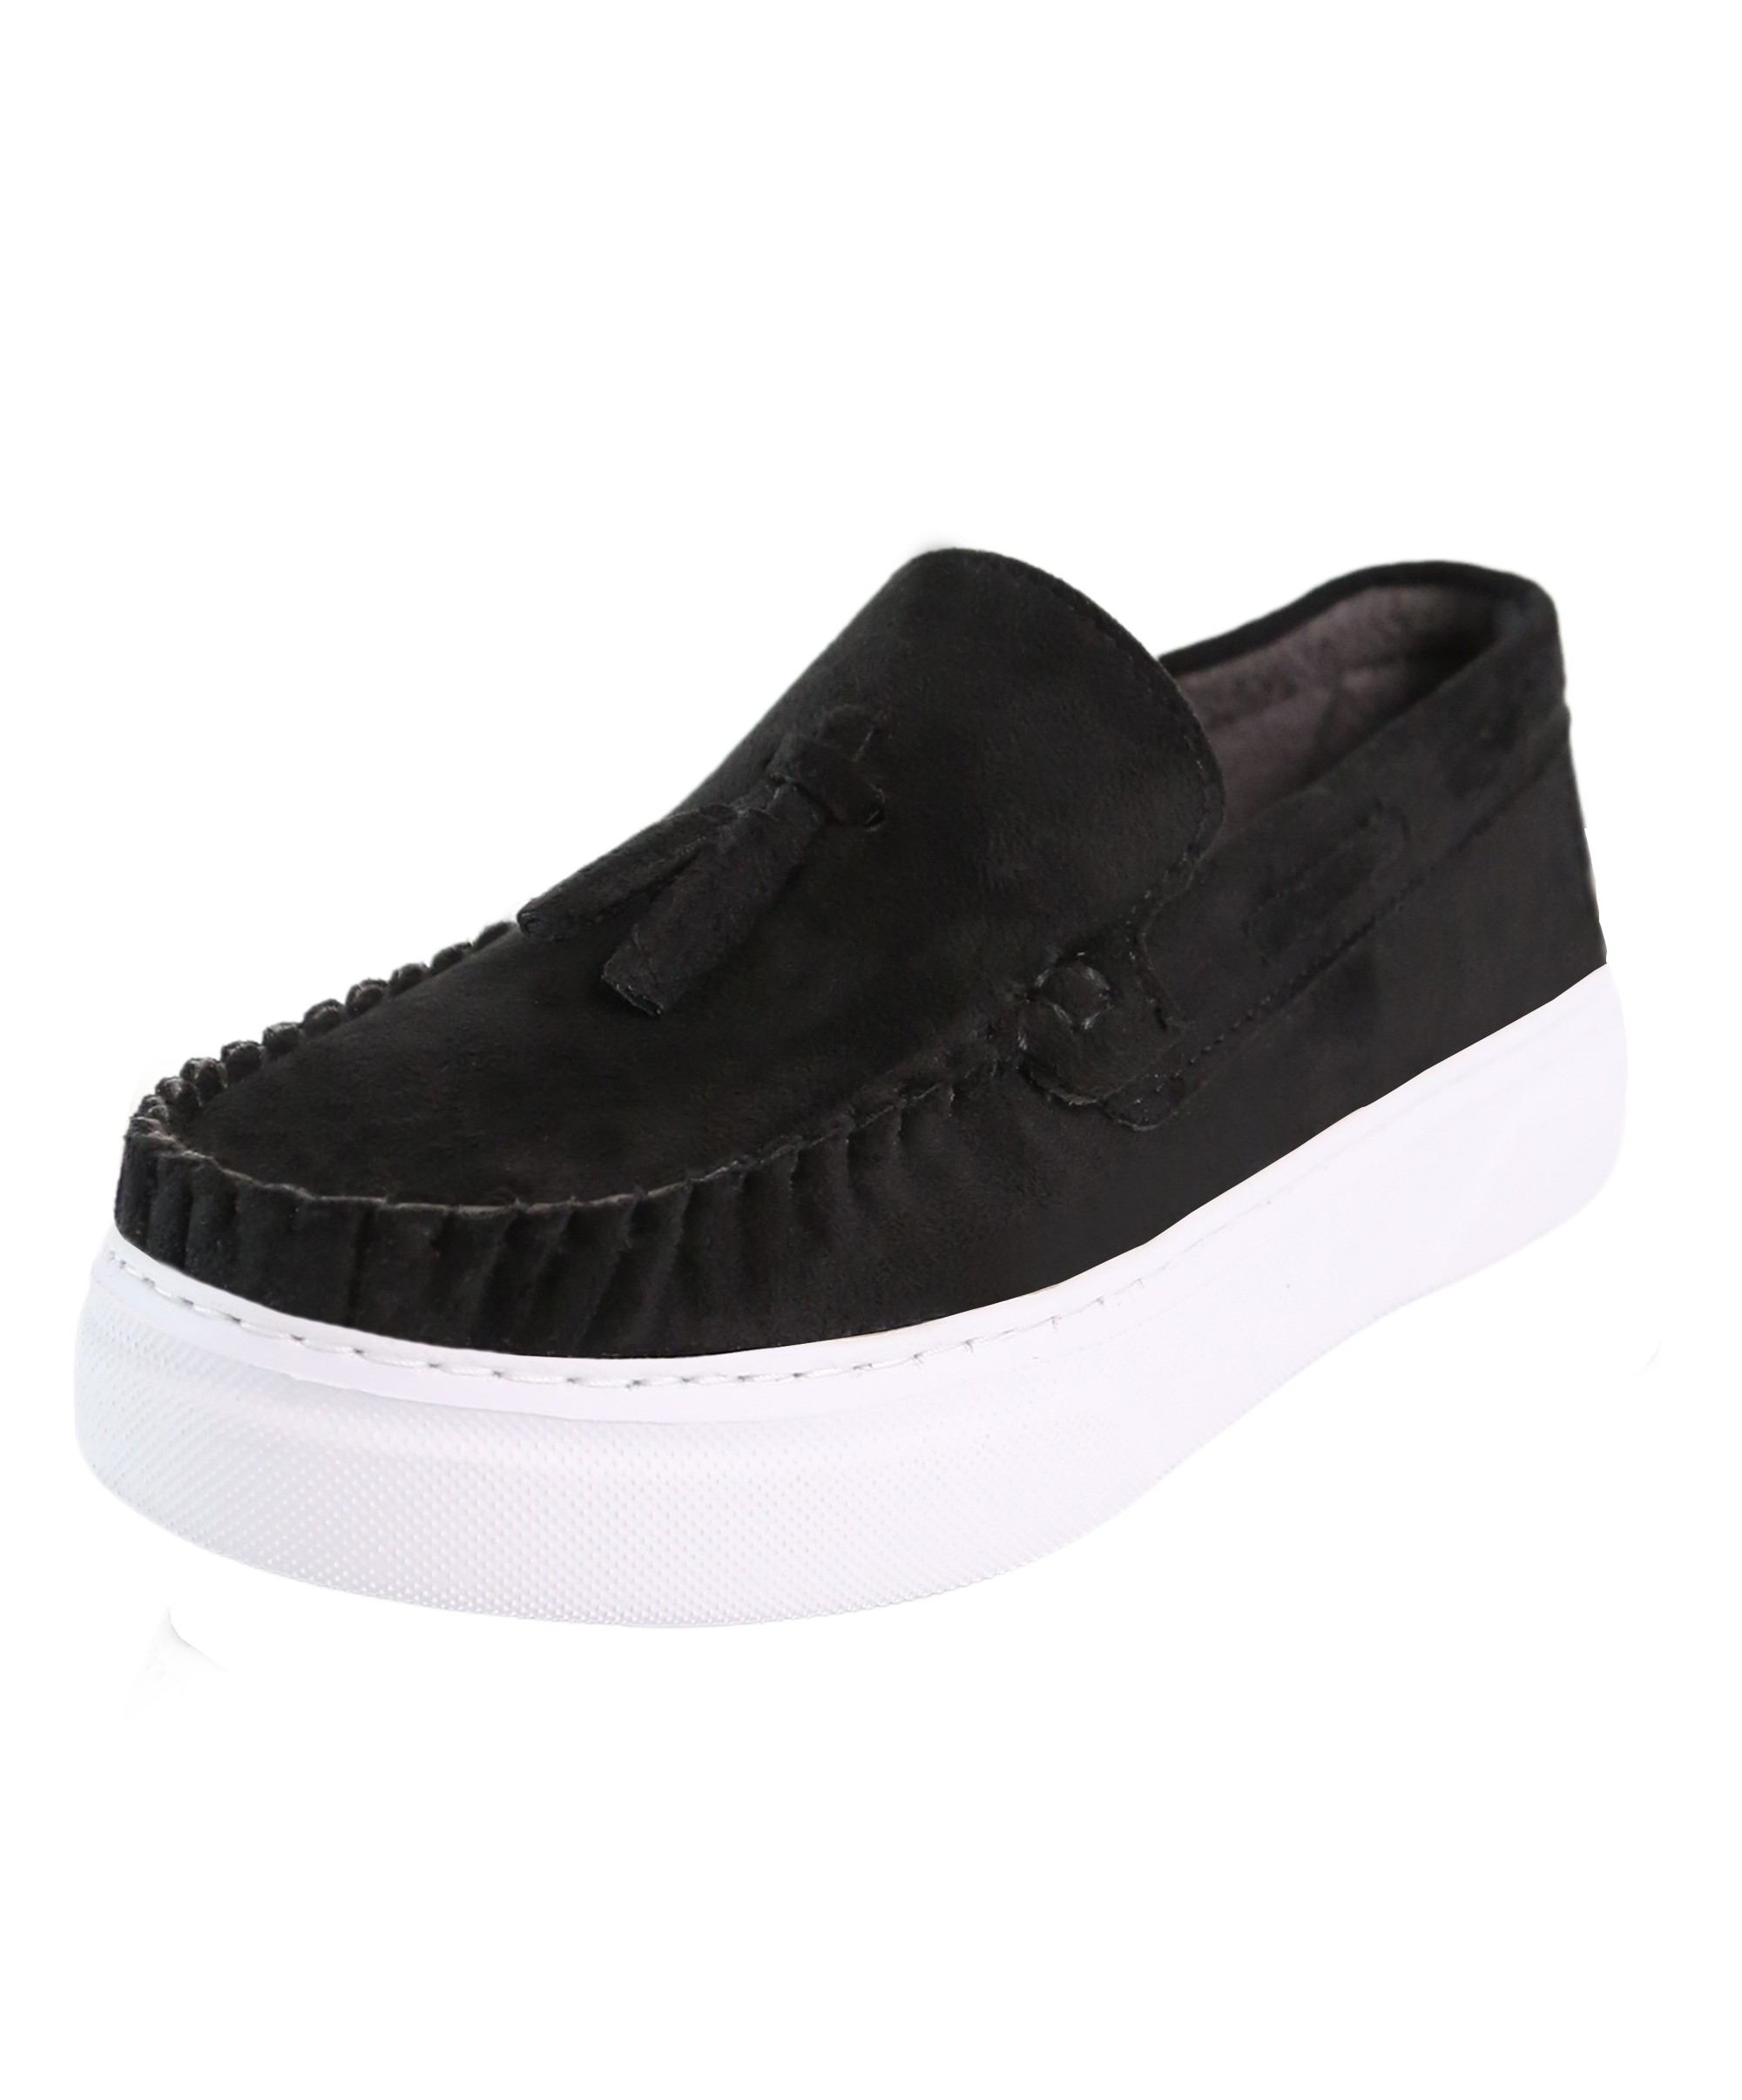 Boys Suede Slip-On Thick Sole Loafers - URBAN - Black